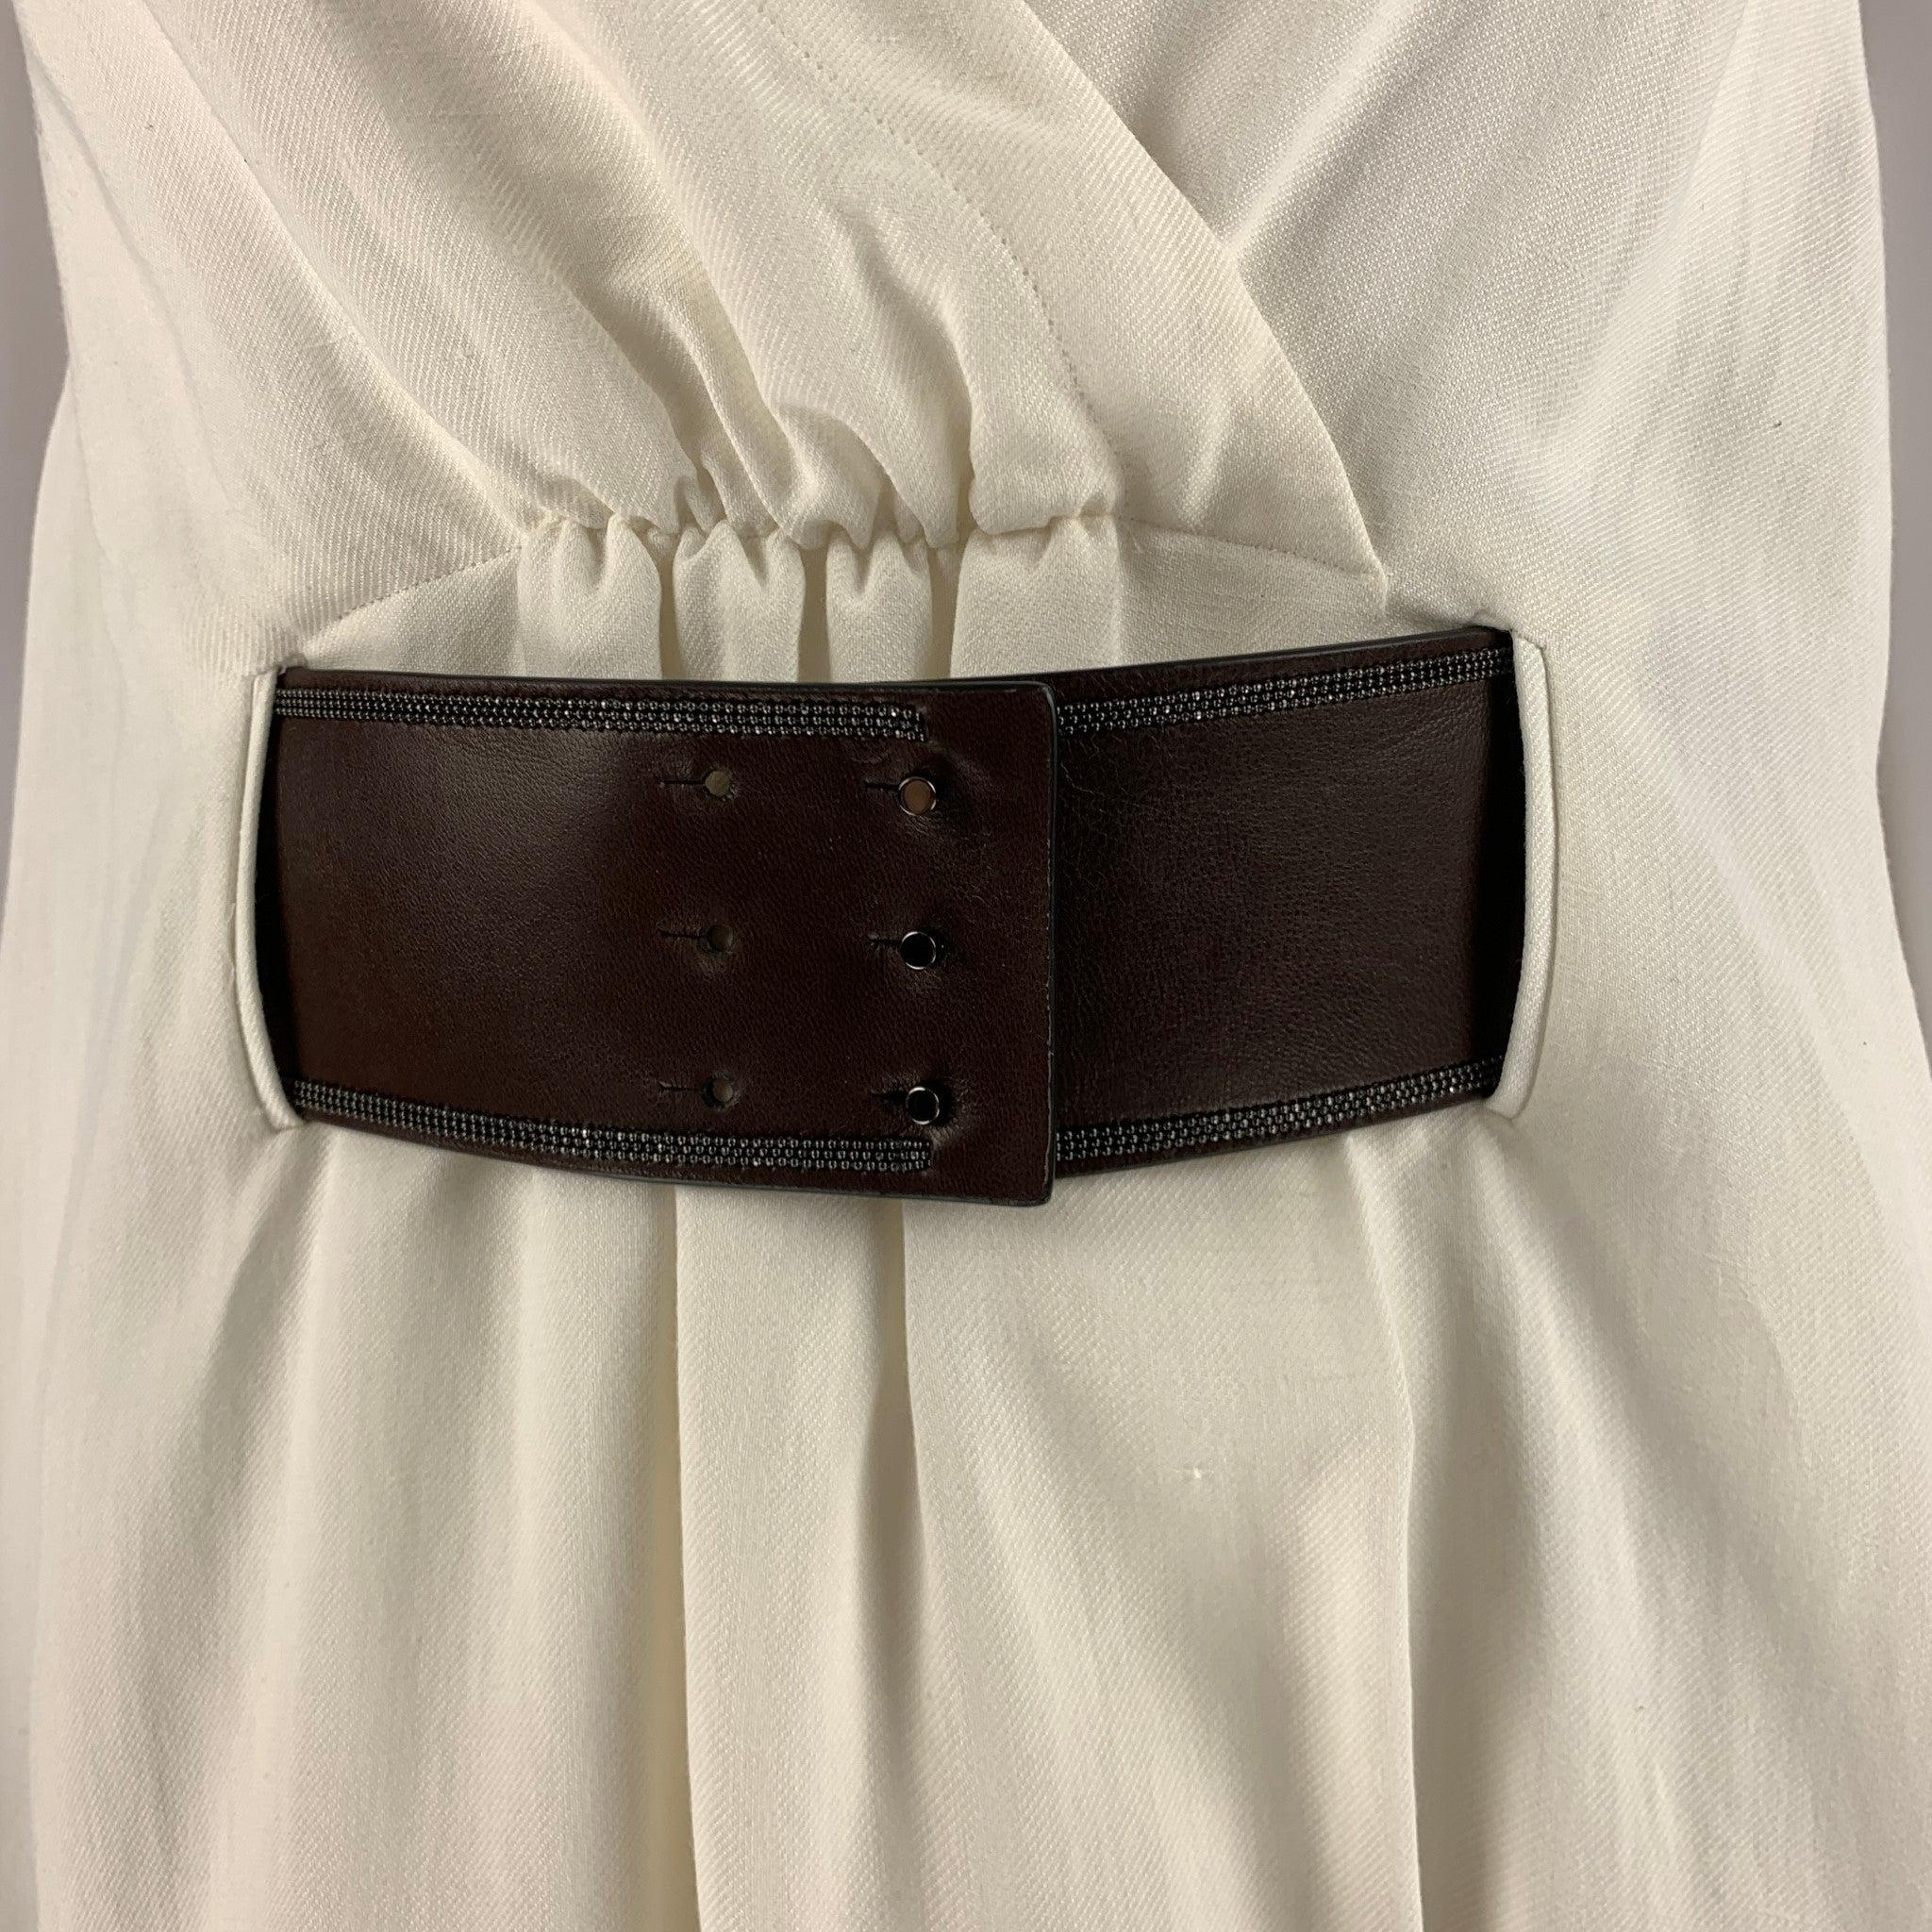 BRUNELLO CUCINELLI sleeveless dress comes in a white viscose and linen woven material featuring V-neck, A-line silhouette, pockets, monili belt, and a wrap skirt design. Made in Italy.Very Good Pre-Owned Condition. 

Marked:  S 

Measurements: 
